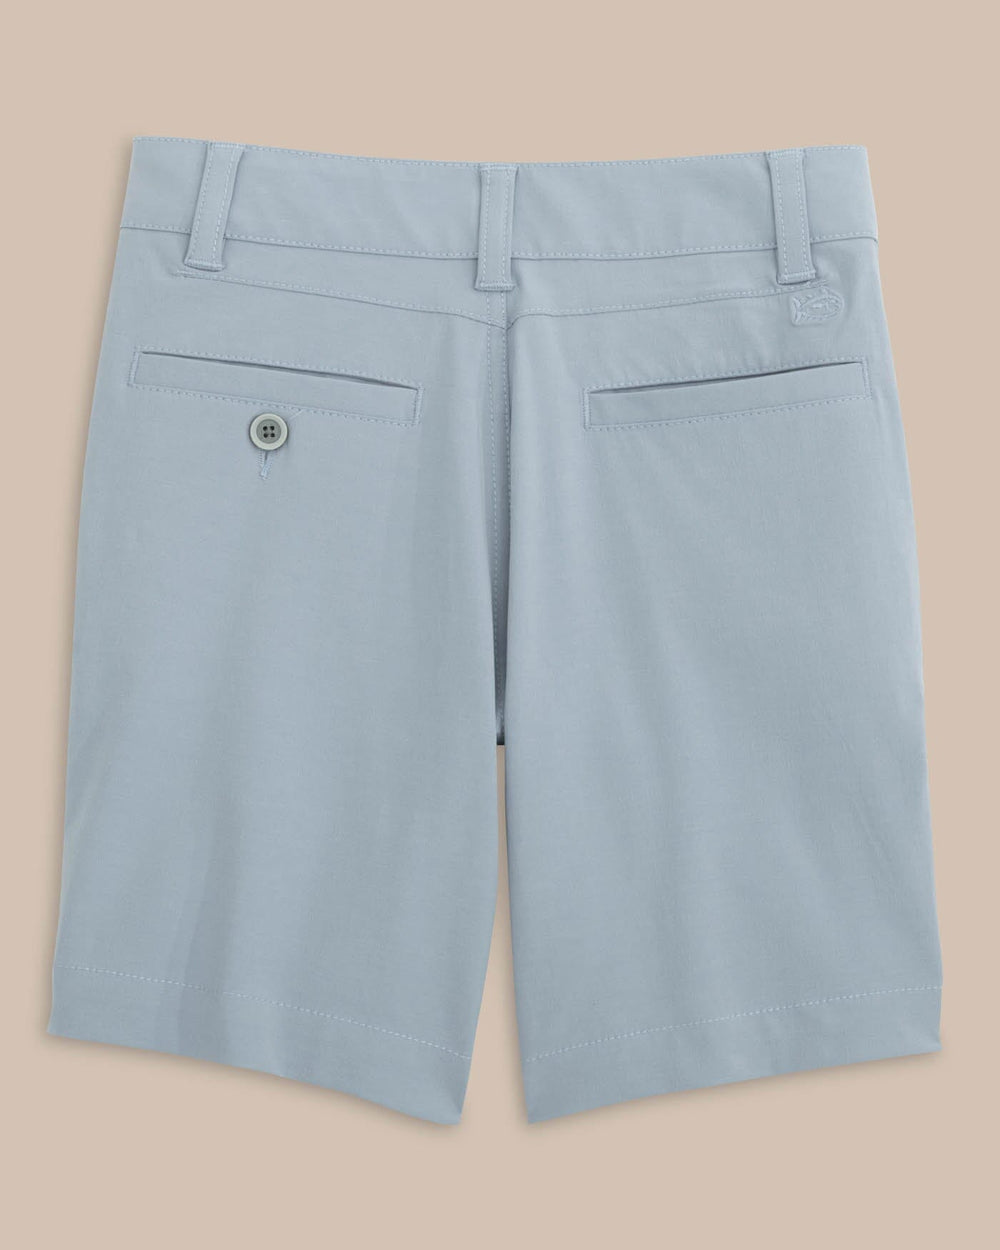 The back view of the Southern Tide Boys T3 Gulf Short by Southern Tide - Tsunami Grey